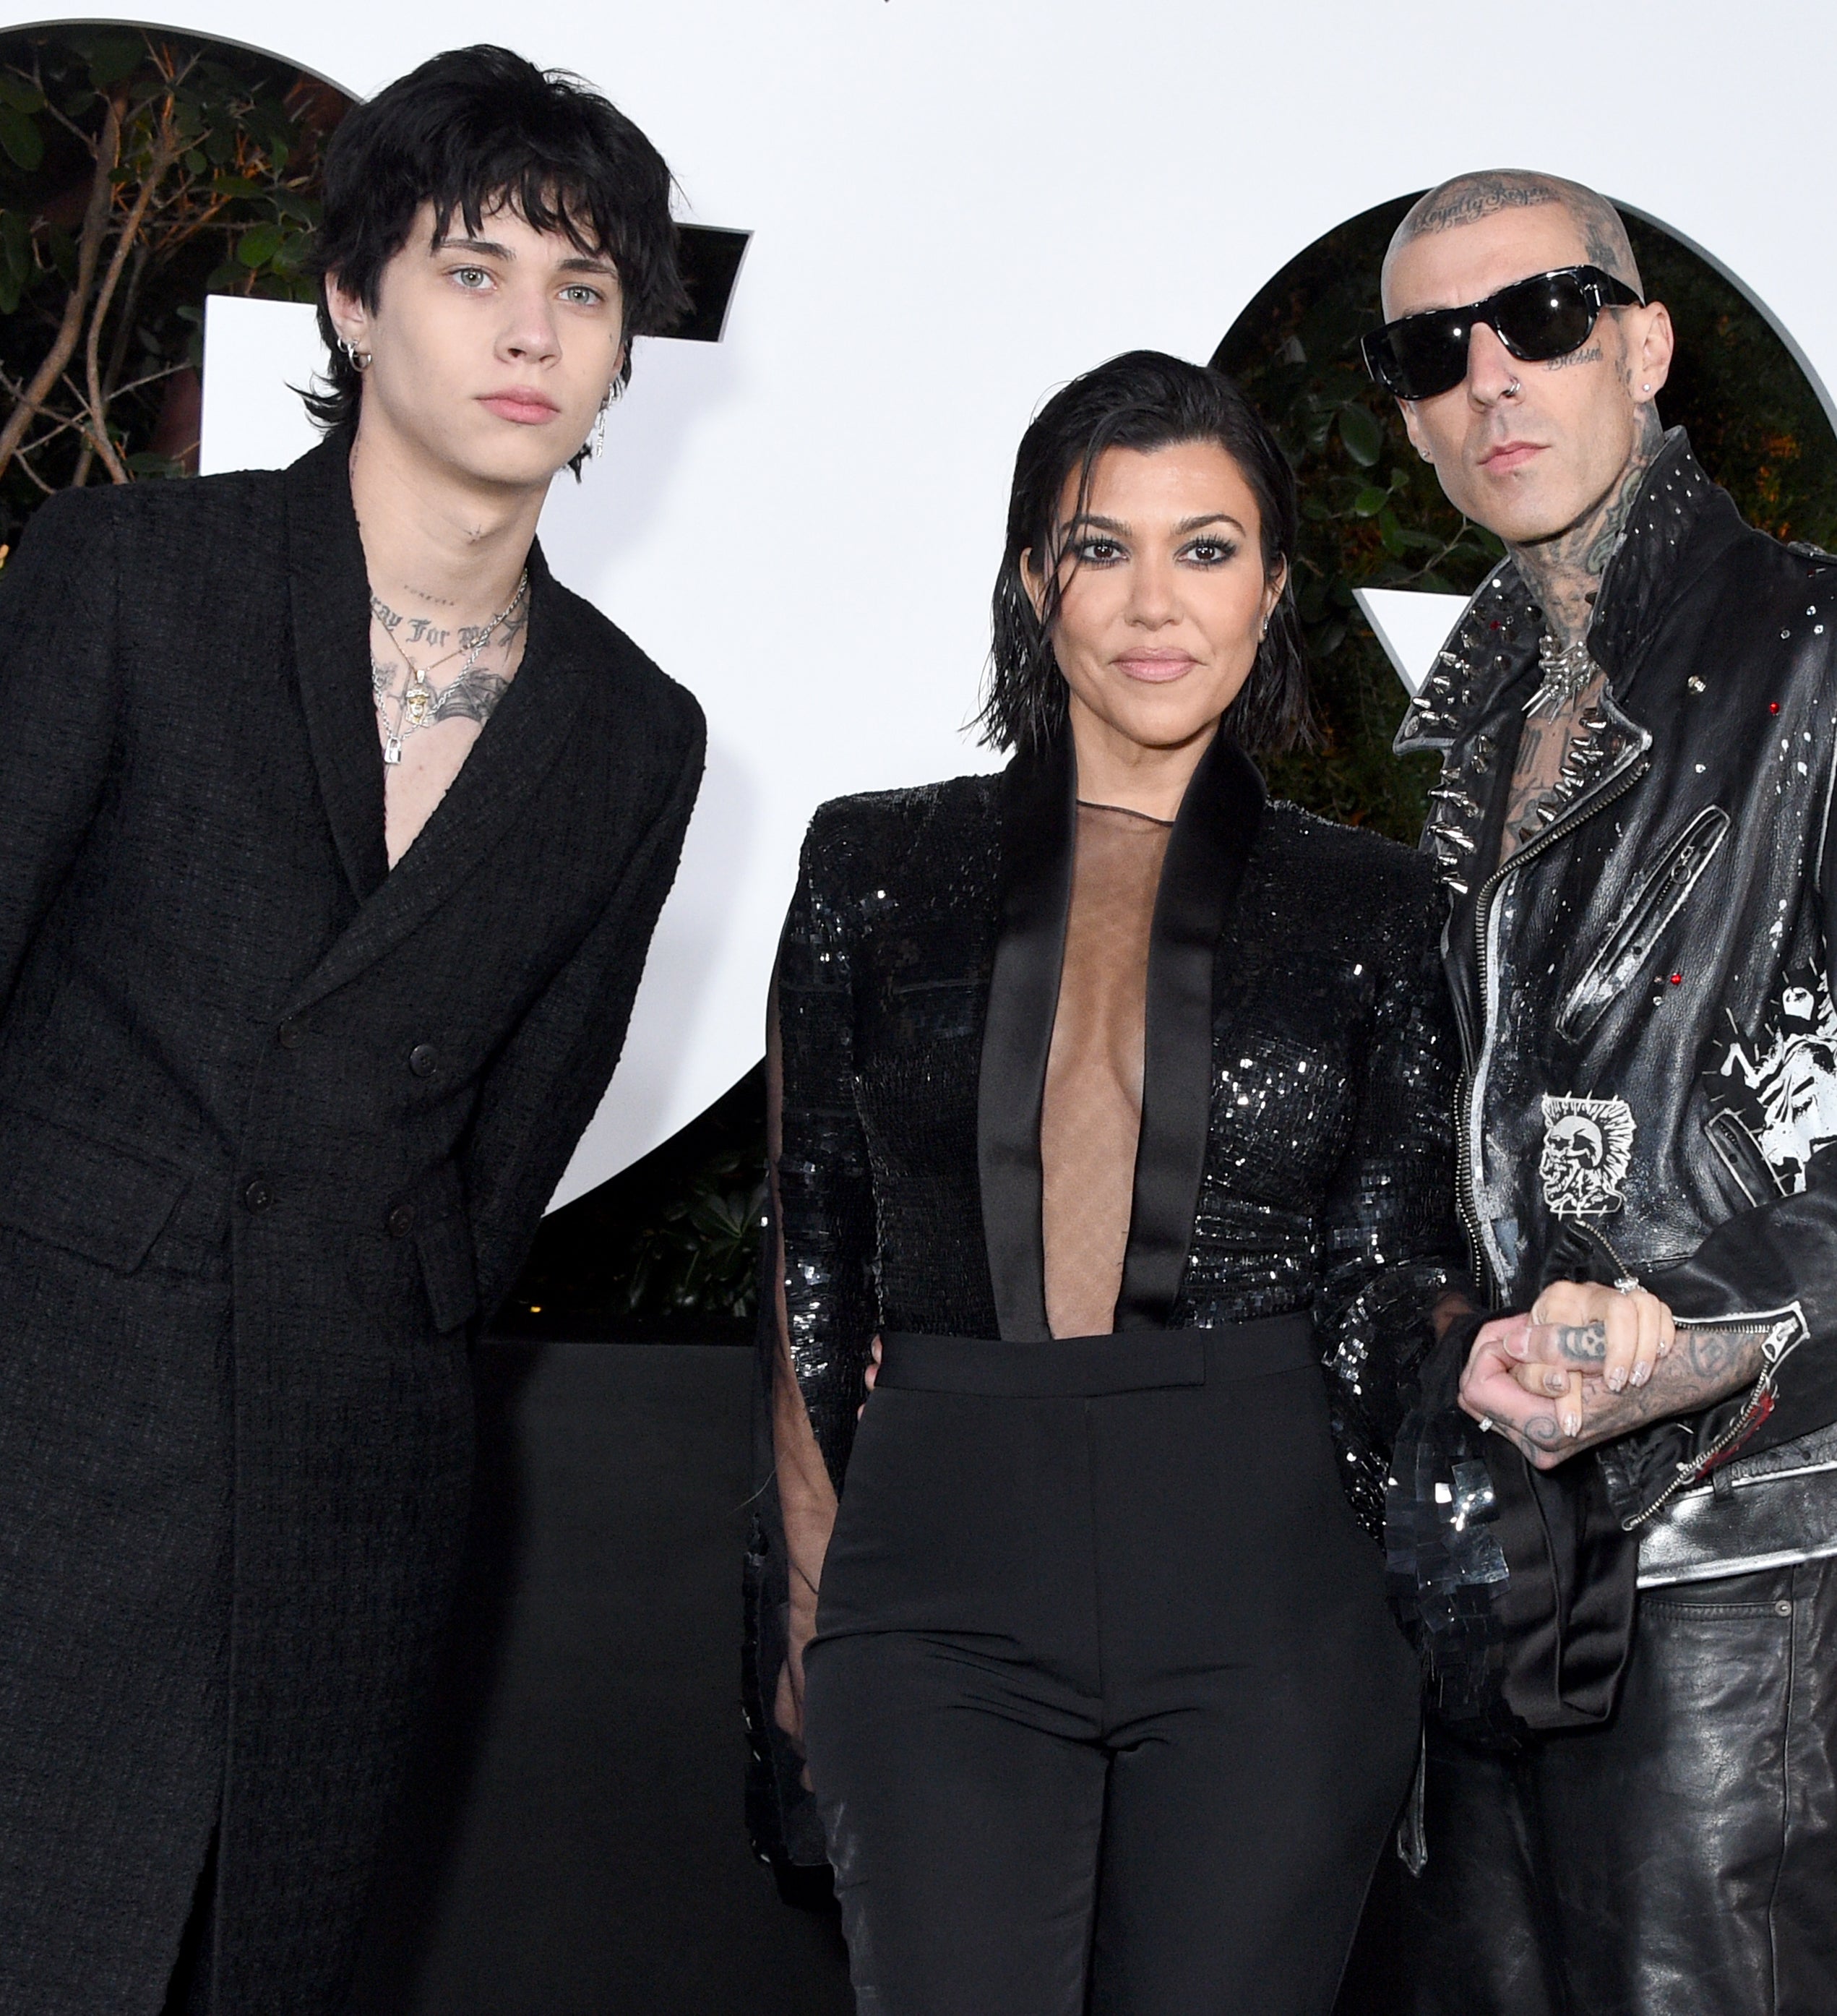 From left to right: Landon, Kourtney, and Travis at a media event